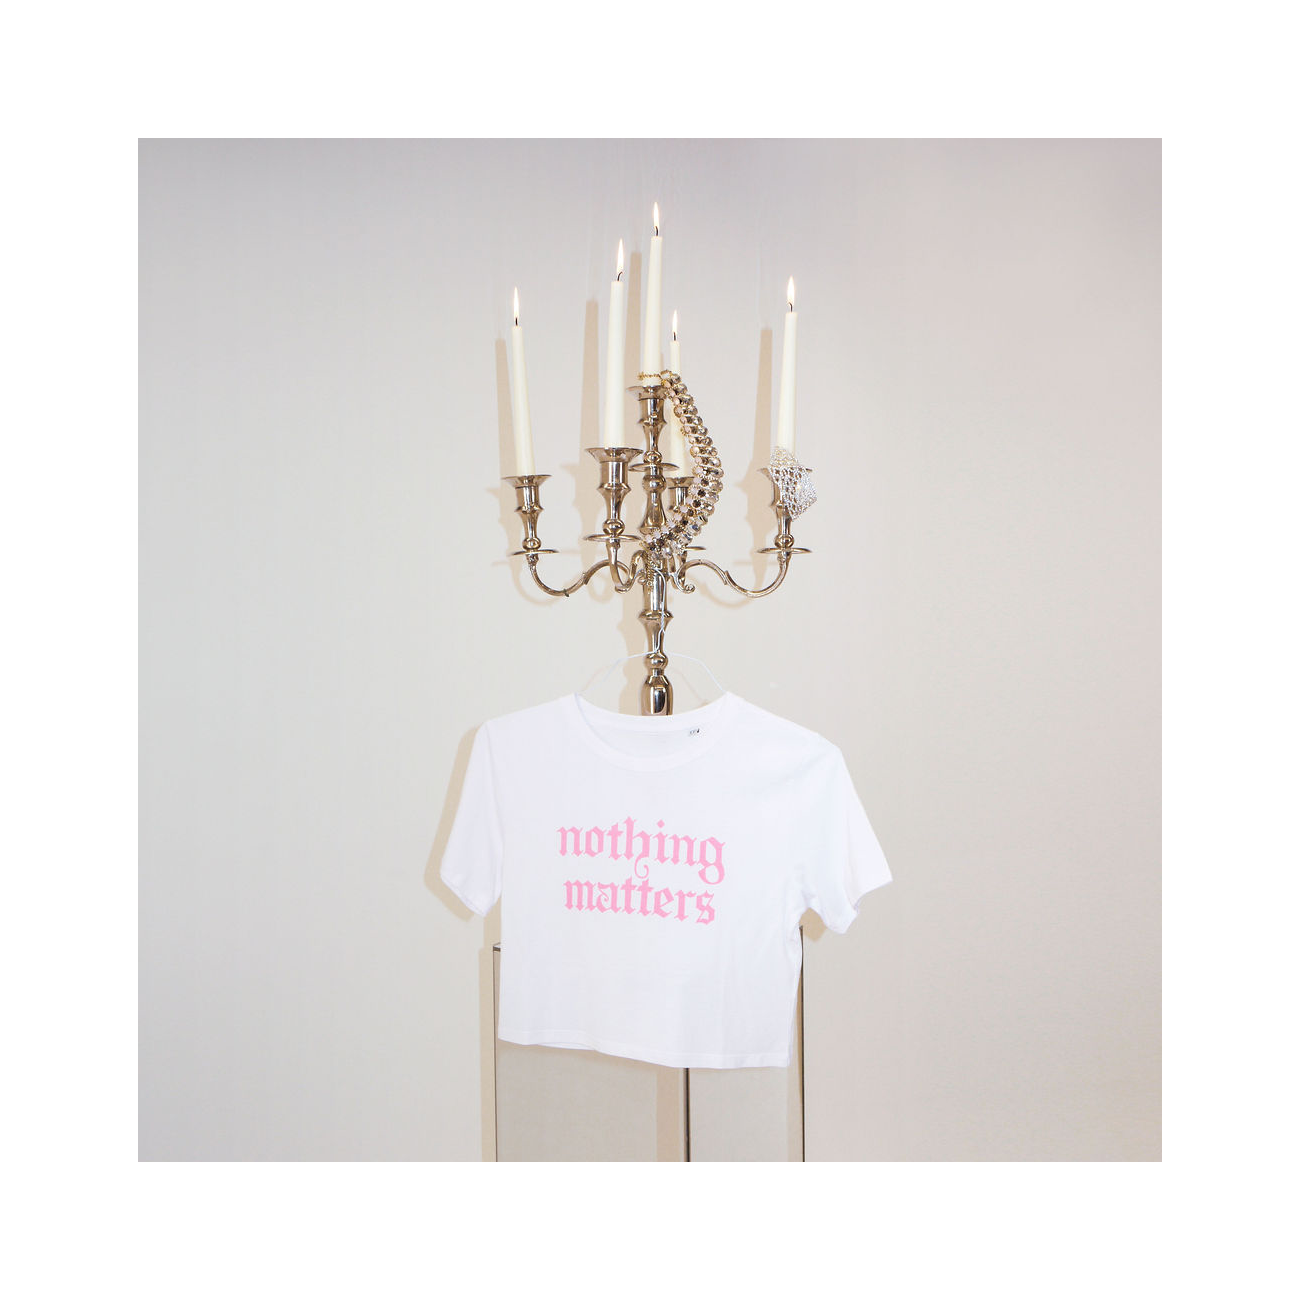 The Last Dinner Party - Nothing Matters: Baby Tee.